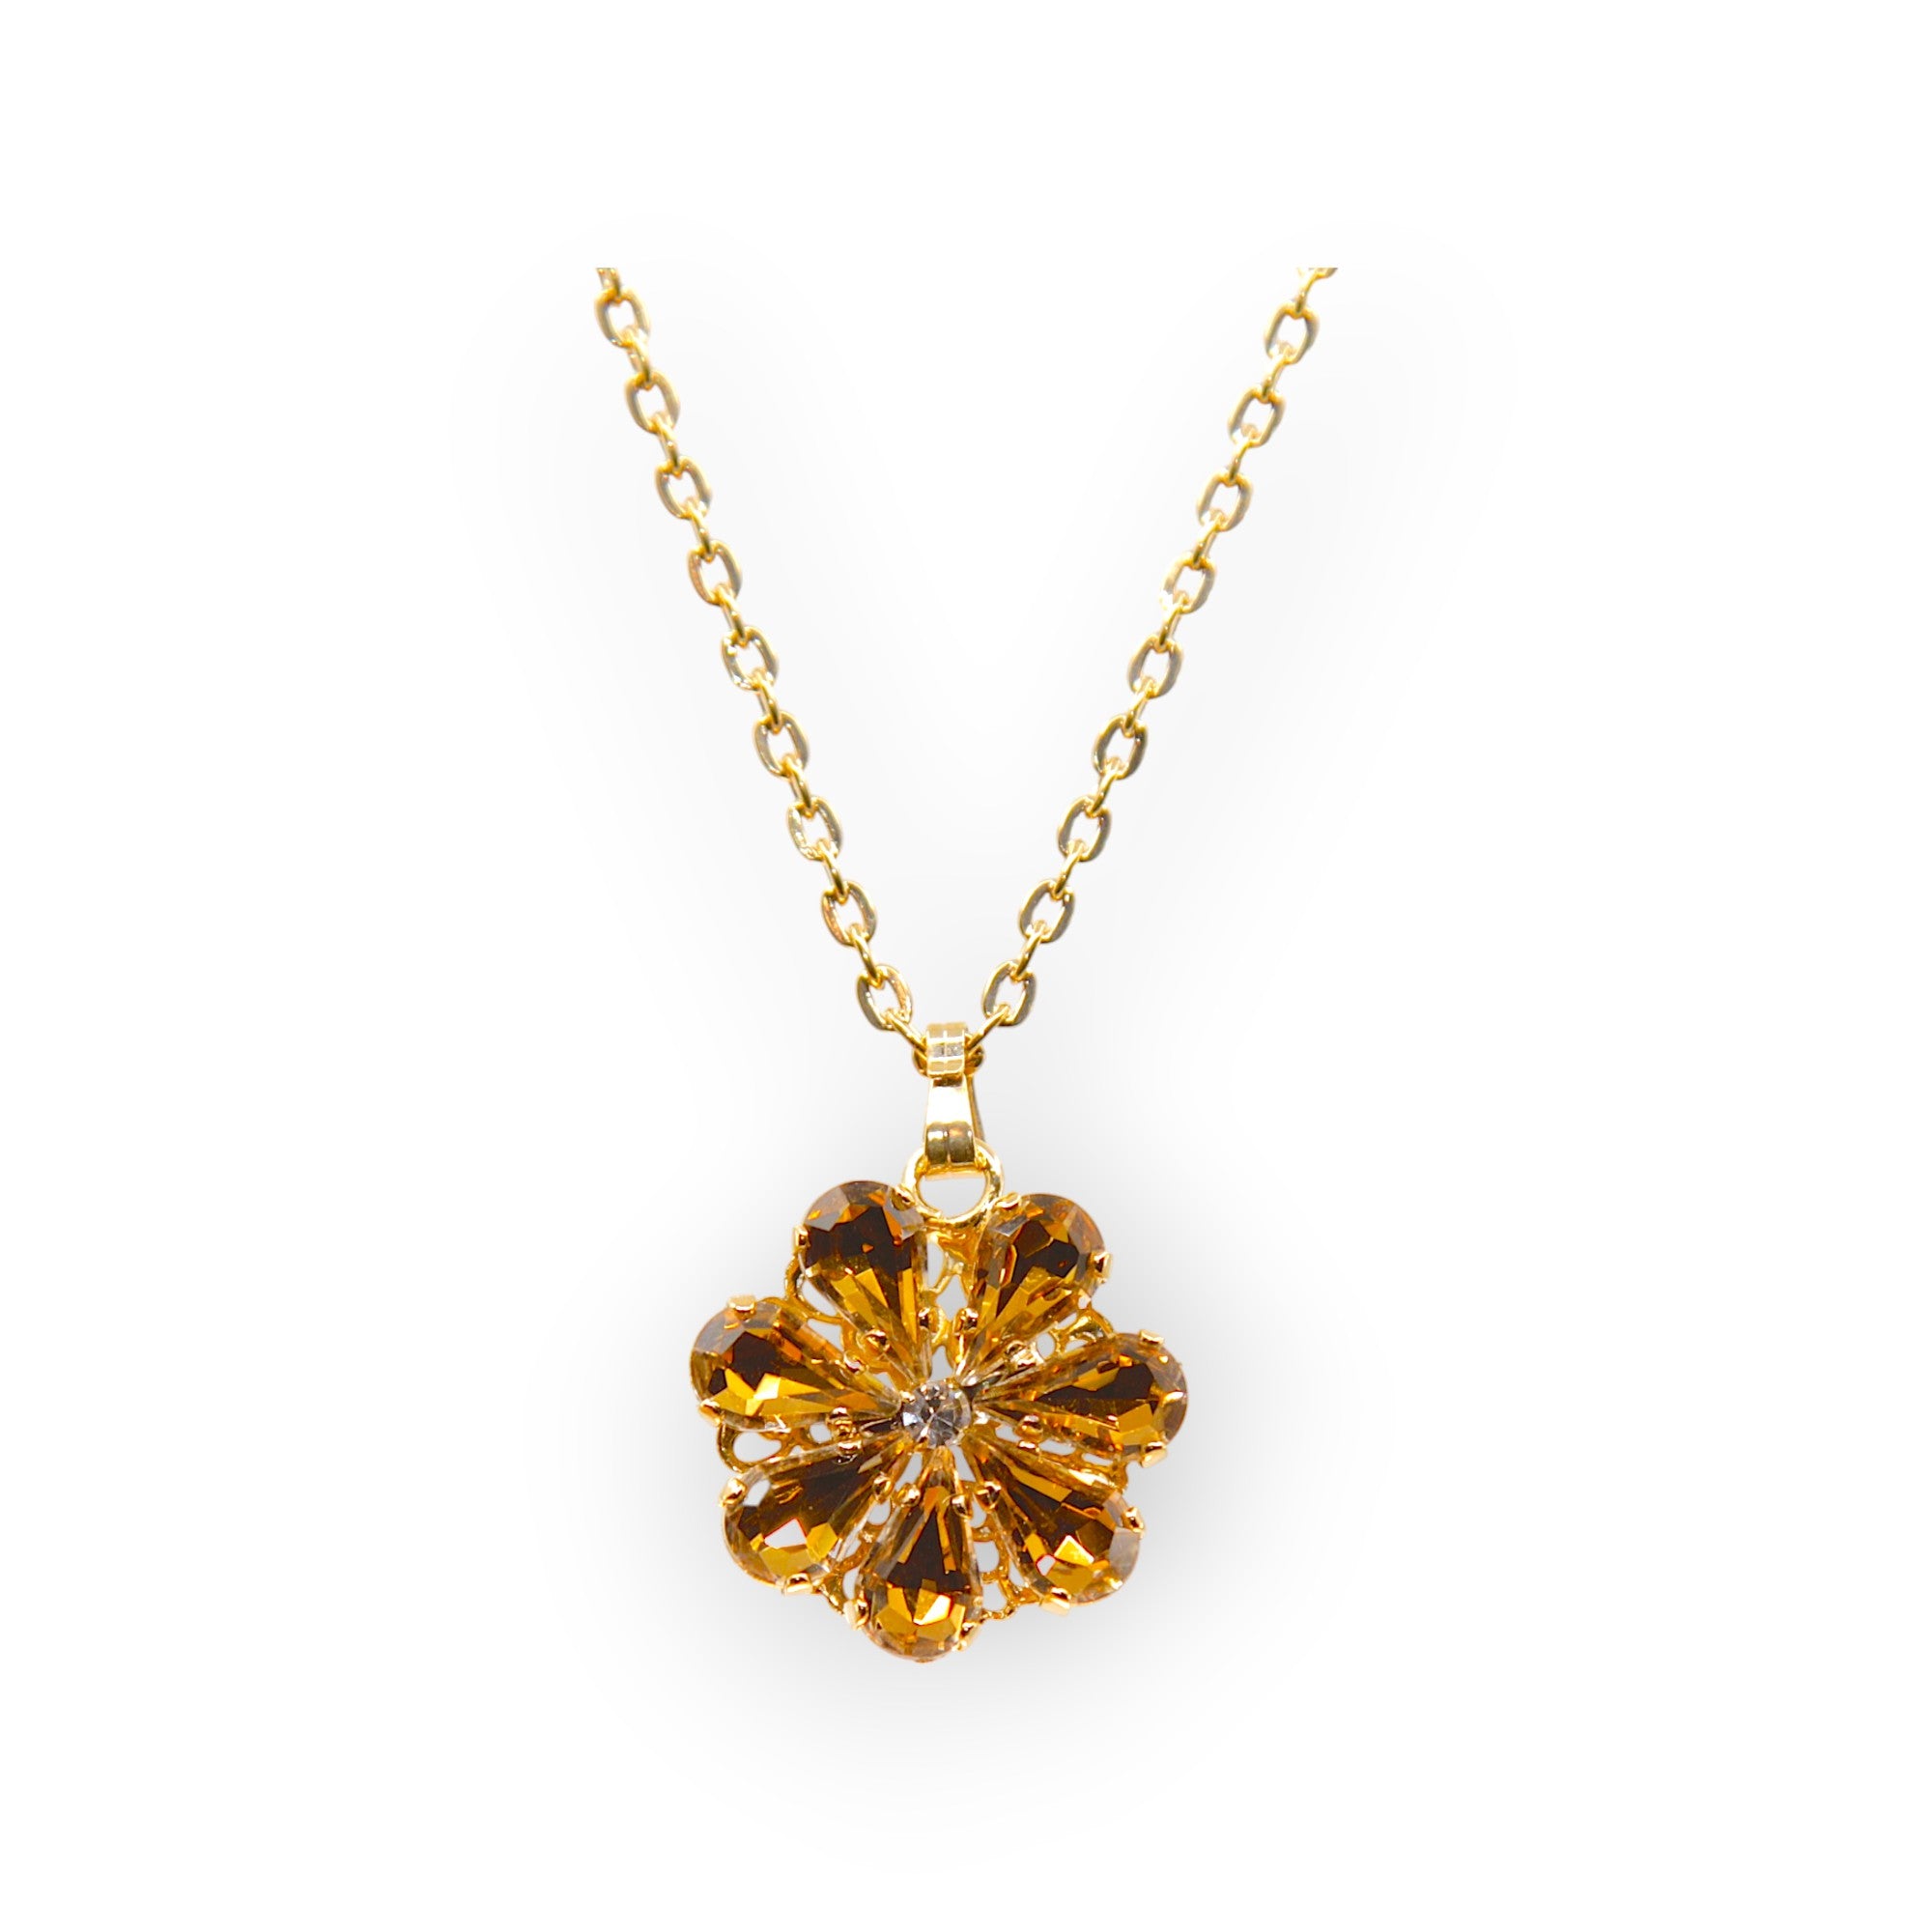 Daisy Pendant Necklace With Crystal Drops In amber and topaz shades.